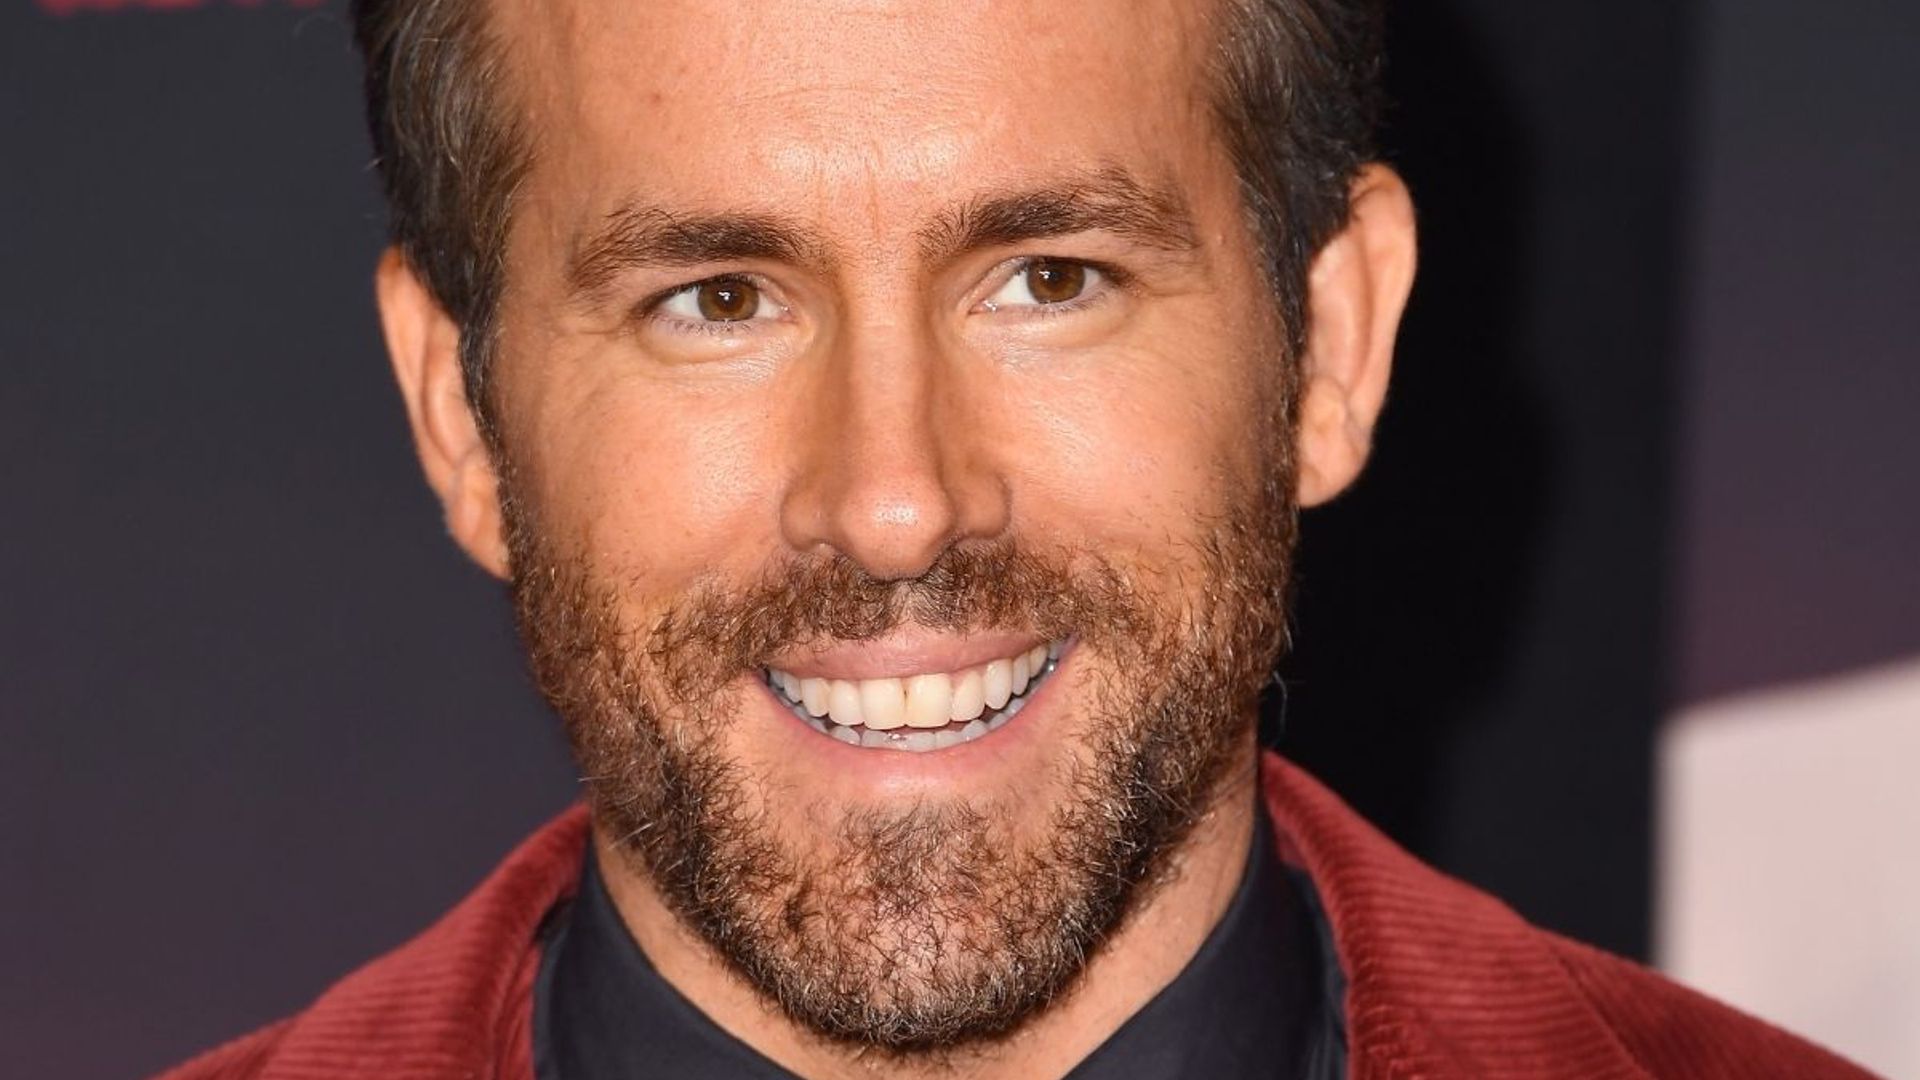 How Ryan Reynolds and the Toronto Maple Leafs helped raise $850,000 for the SickKids Foundation